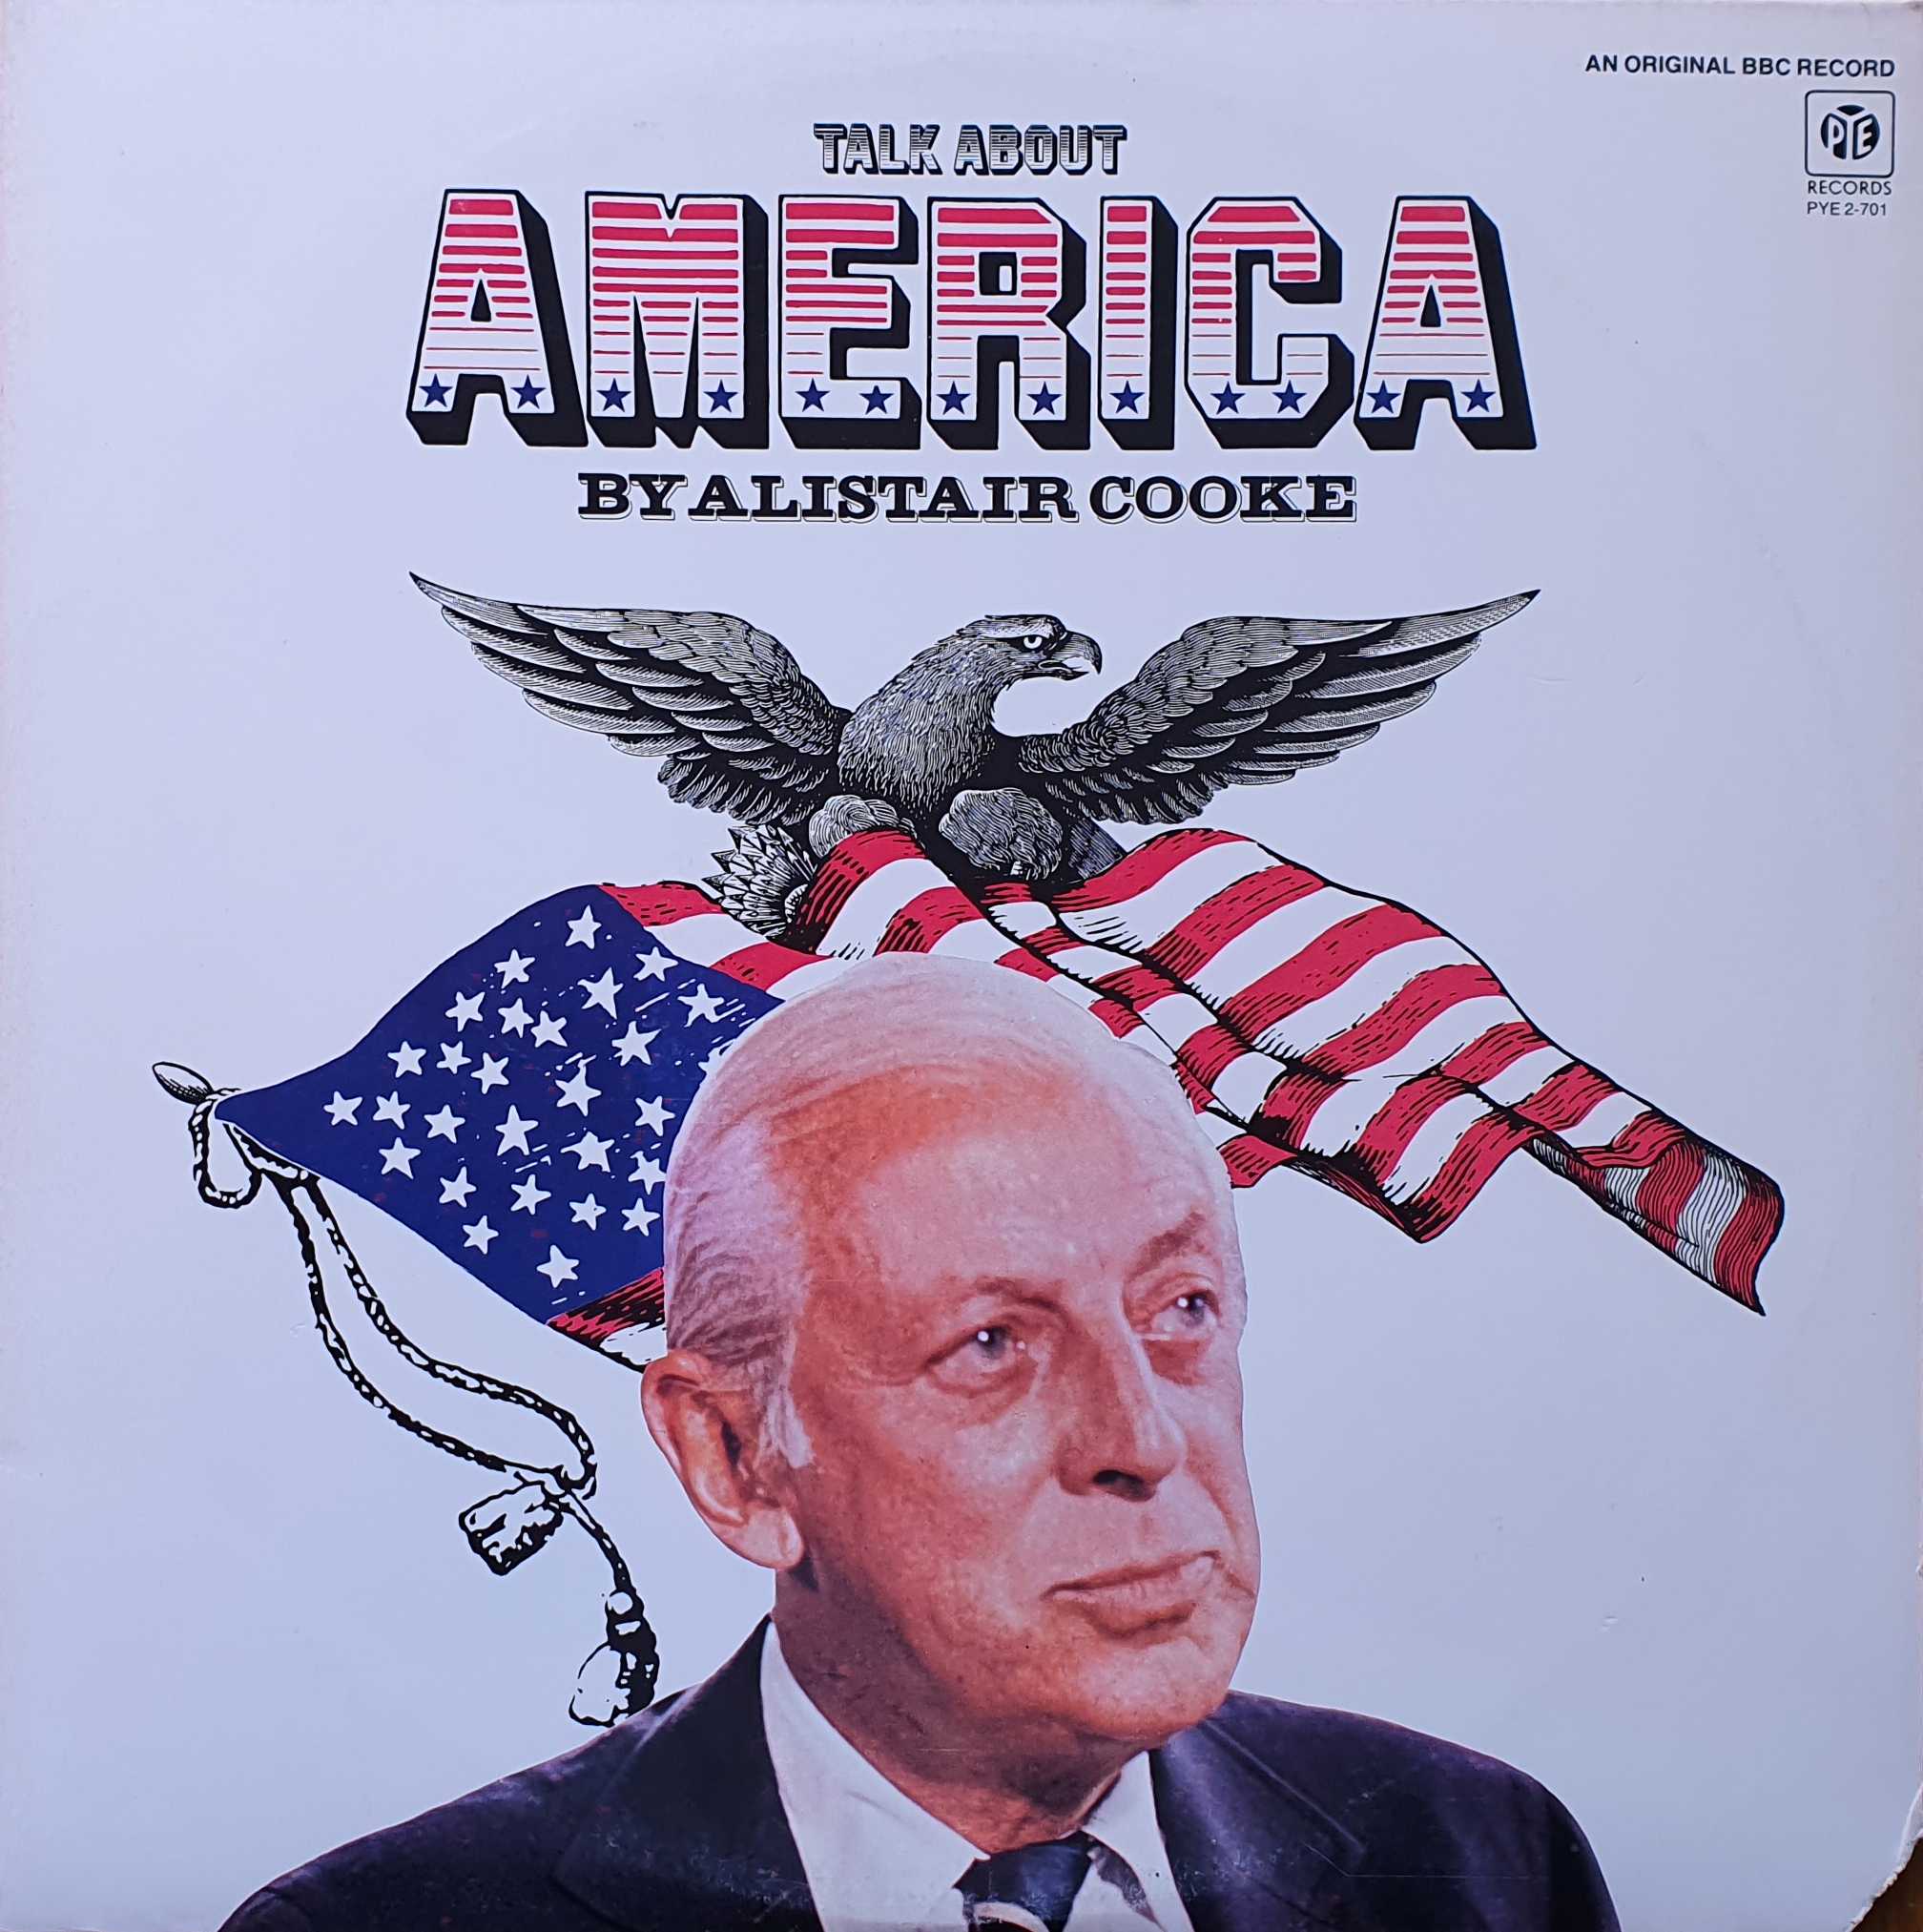 Picture of Talk about America (US import) by artist Alistair Cooke from the BBC albums - Records and Tapes library